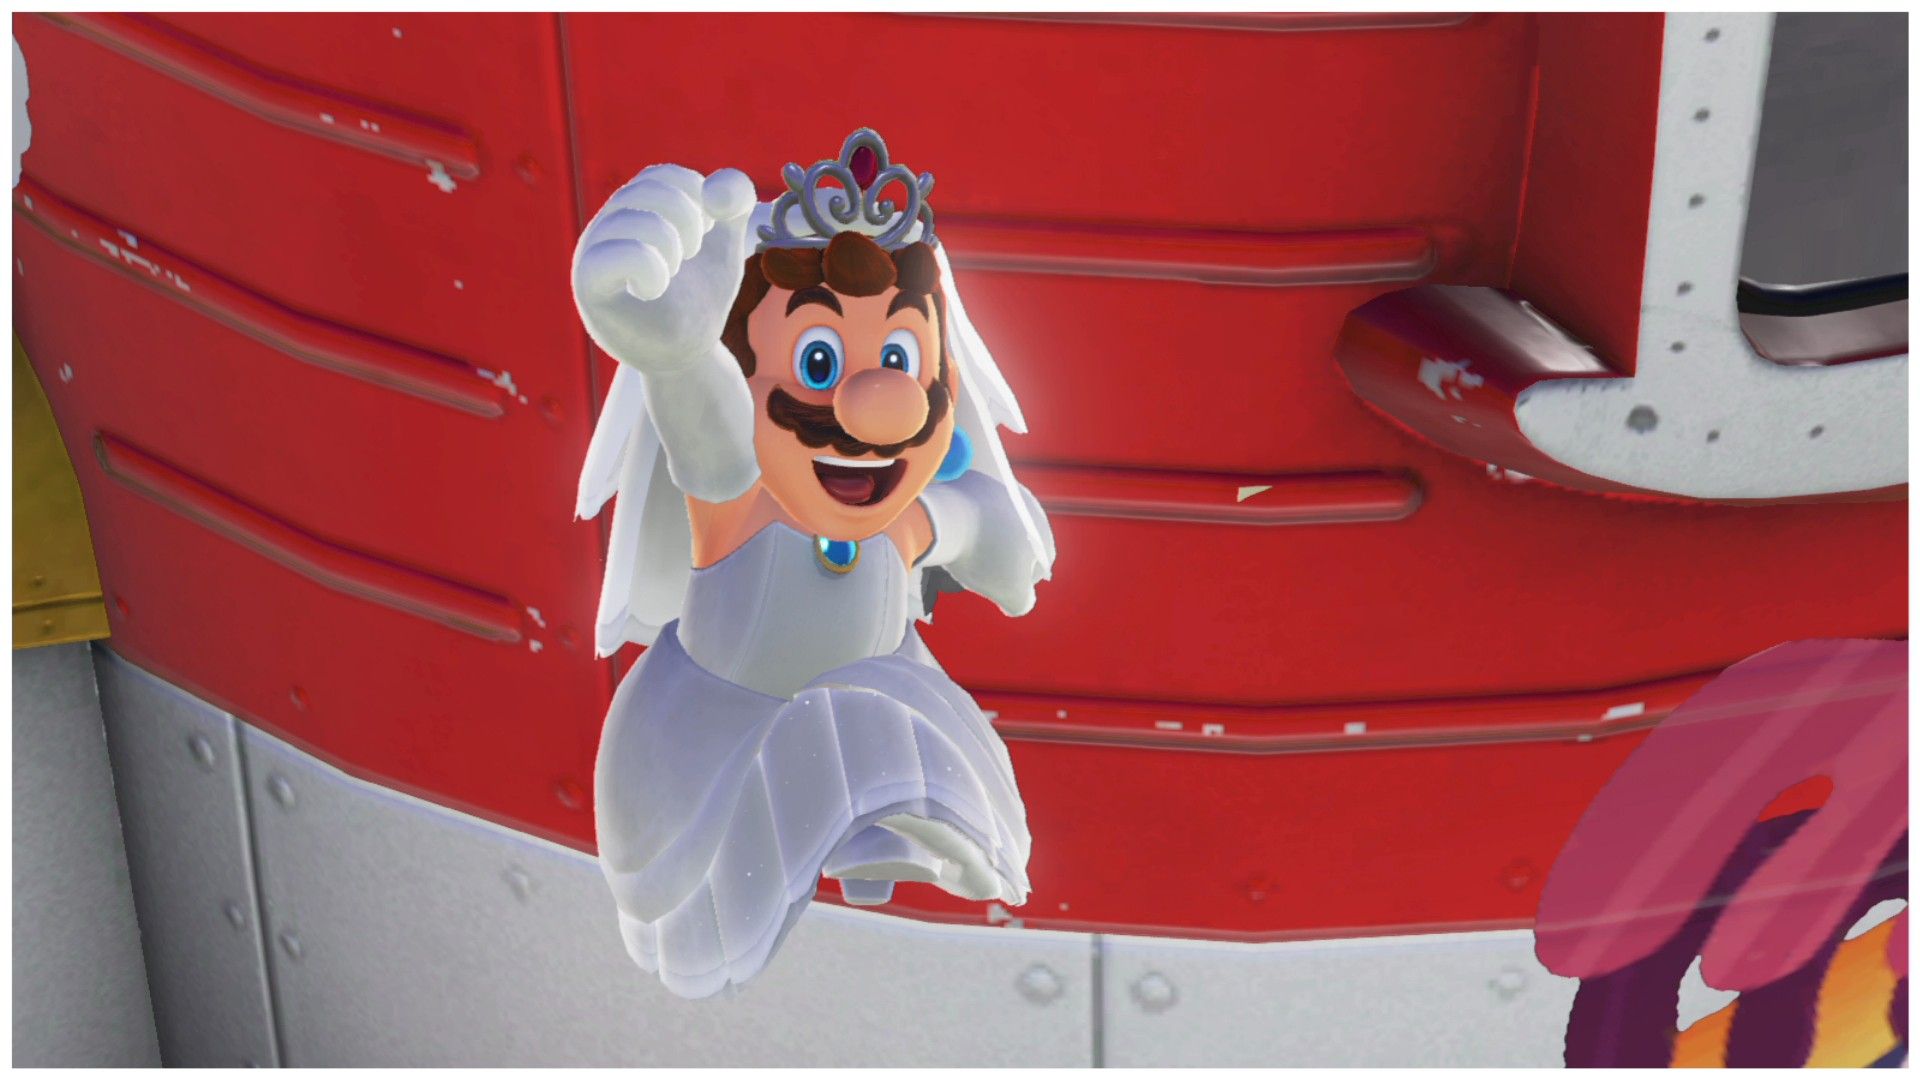 Mario's New Wedding Dress, some annotations on the relationship